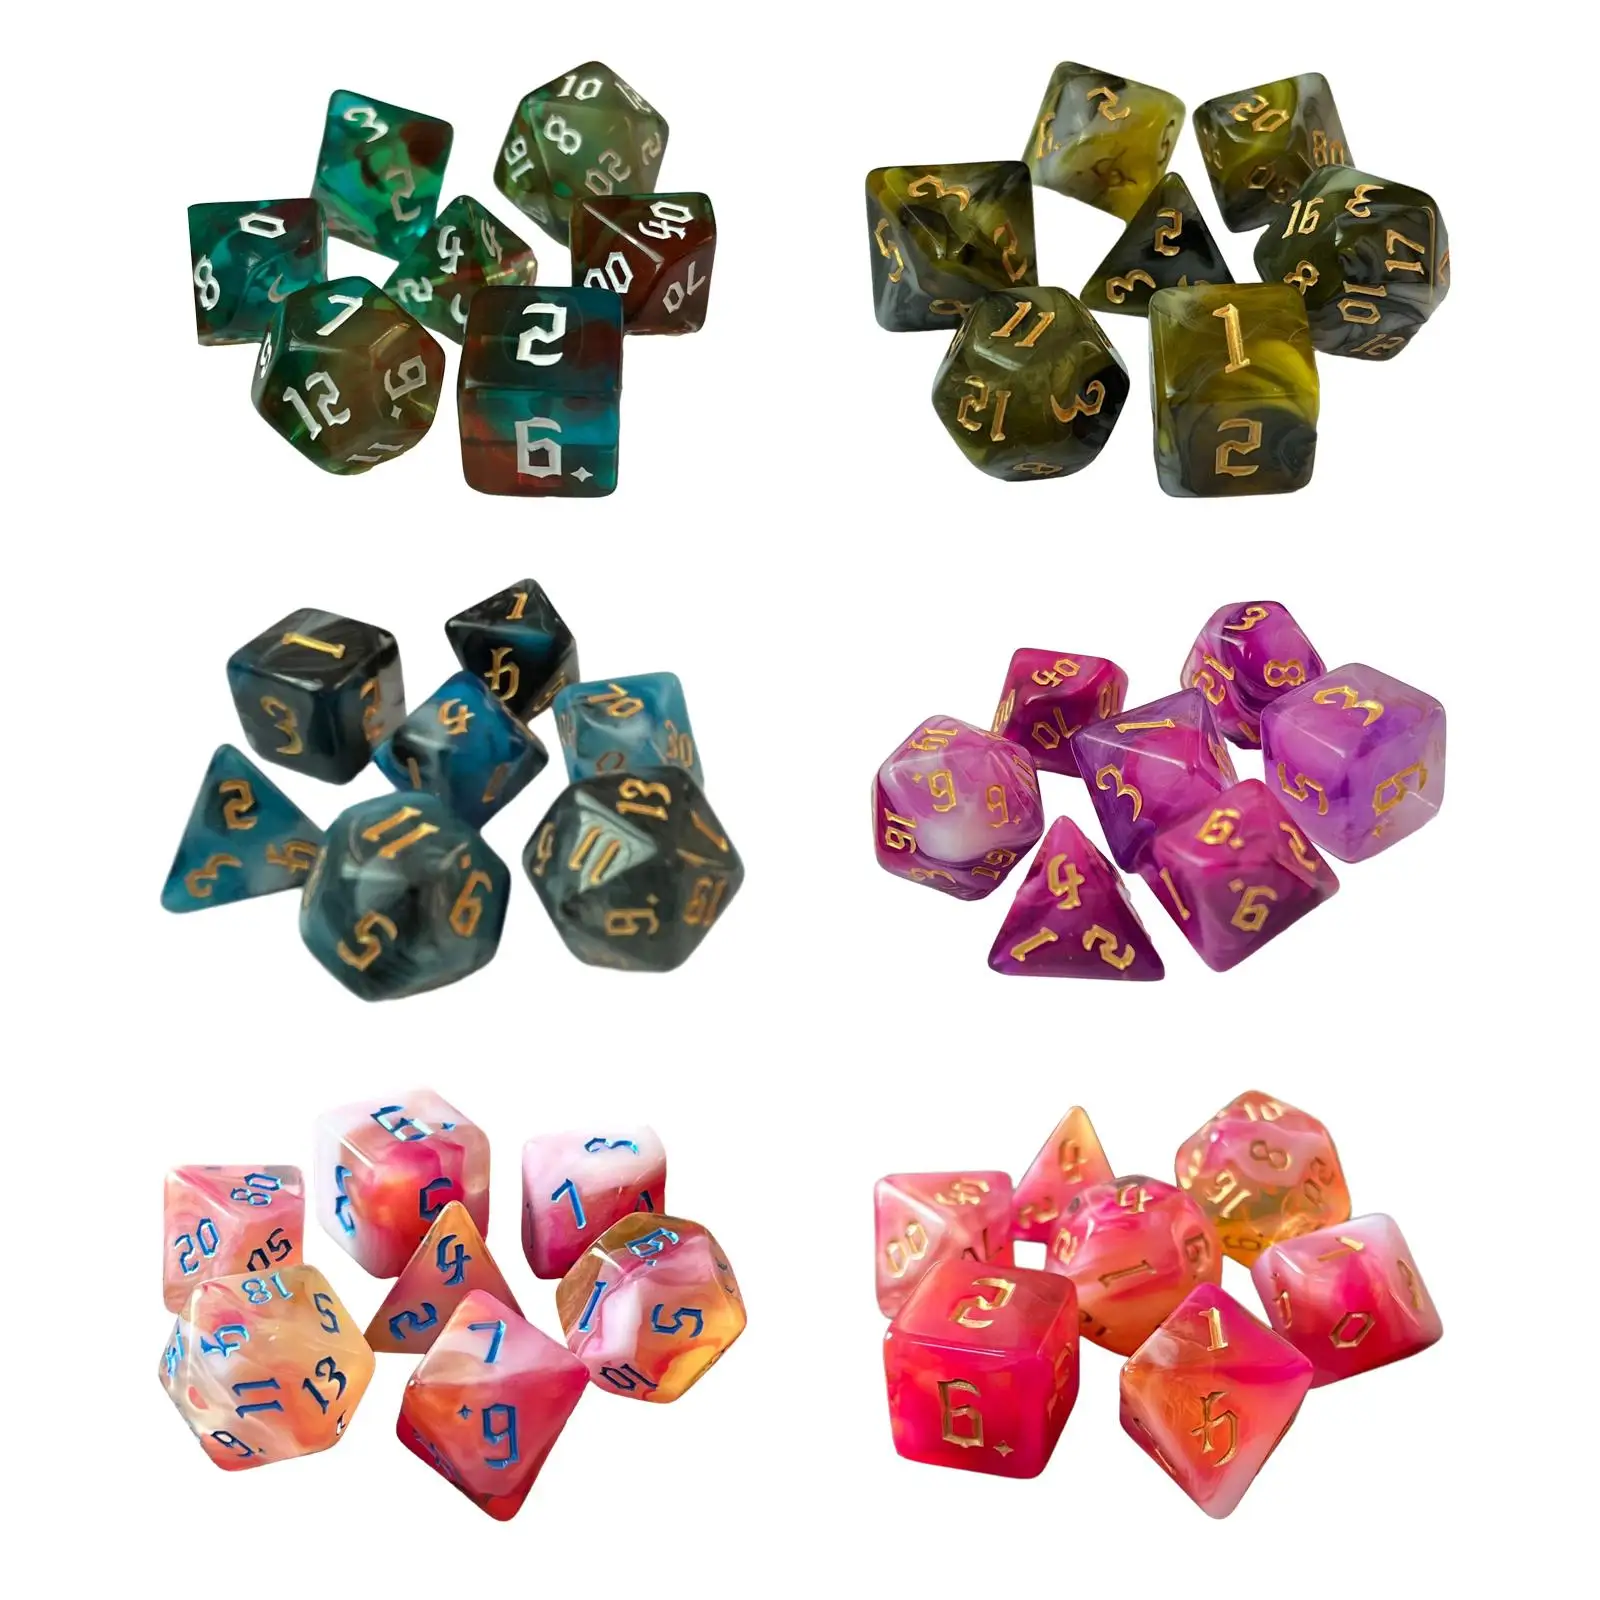 

7 Pieces Double Color Polyhedral Dices Role Playing Dice Party Supplies Large Digitals D6 D4 D8 D10 (00-90 and 0-9) D12 D20